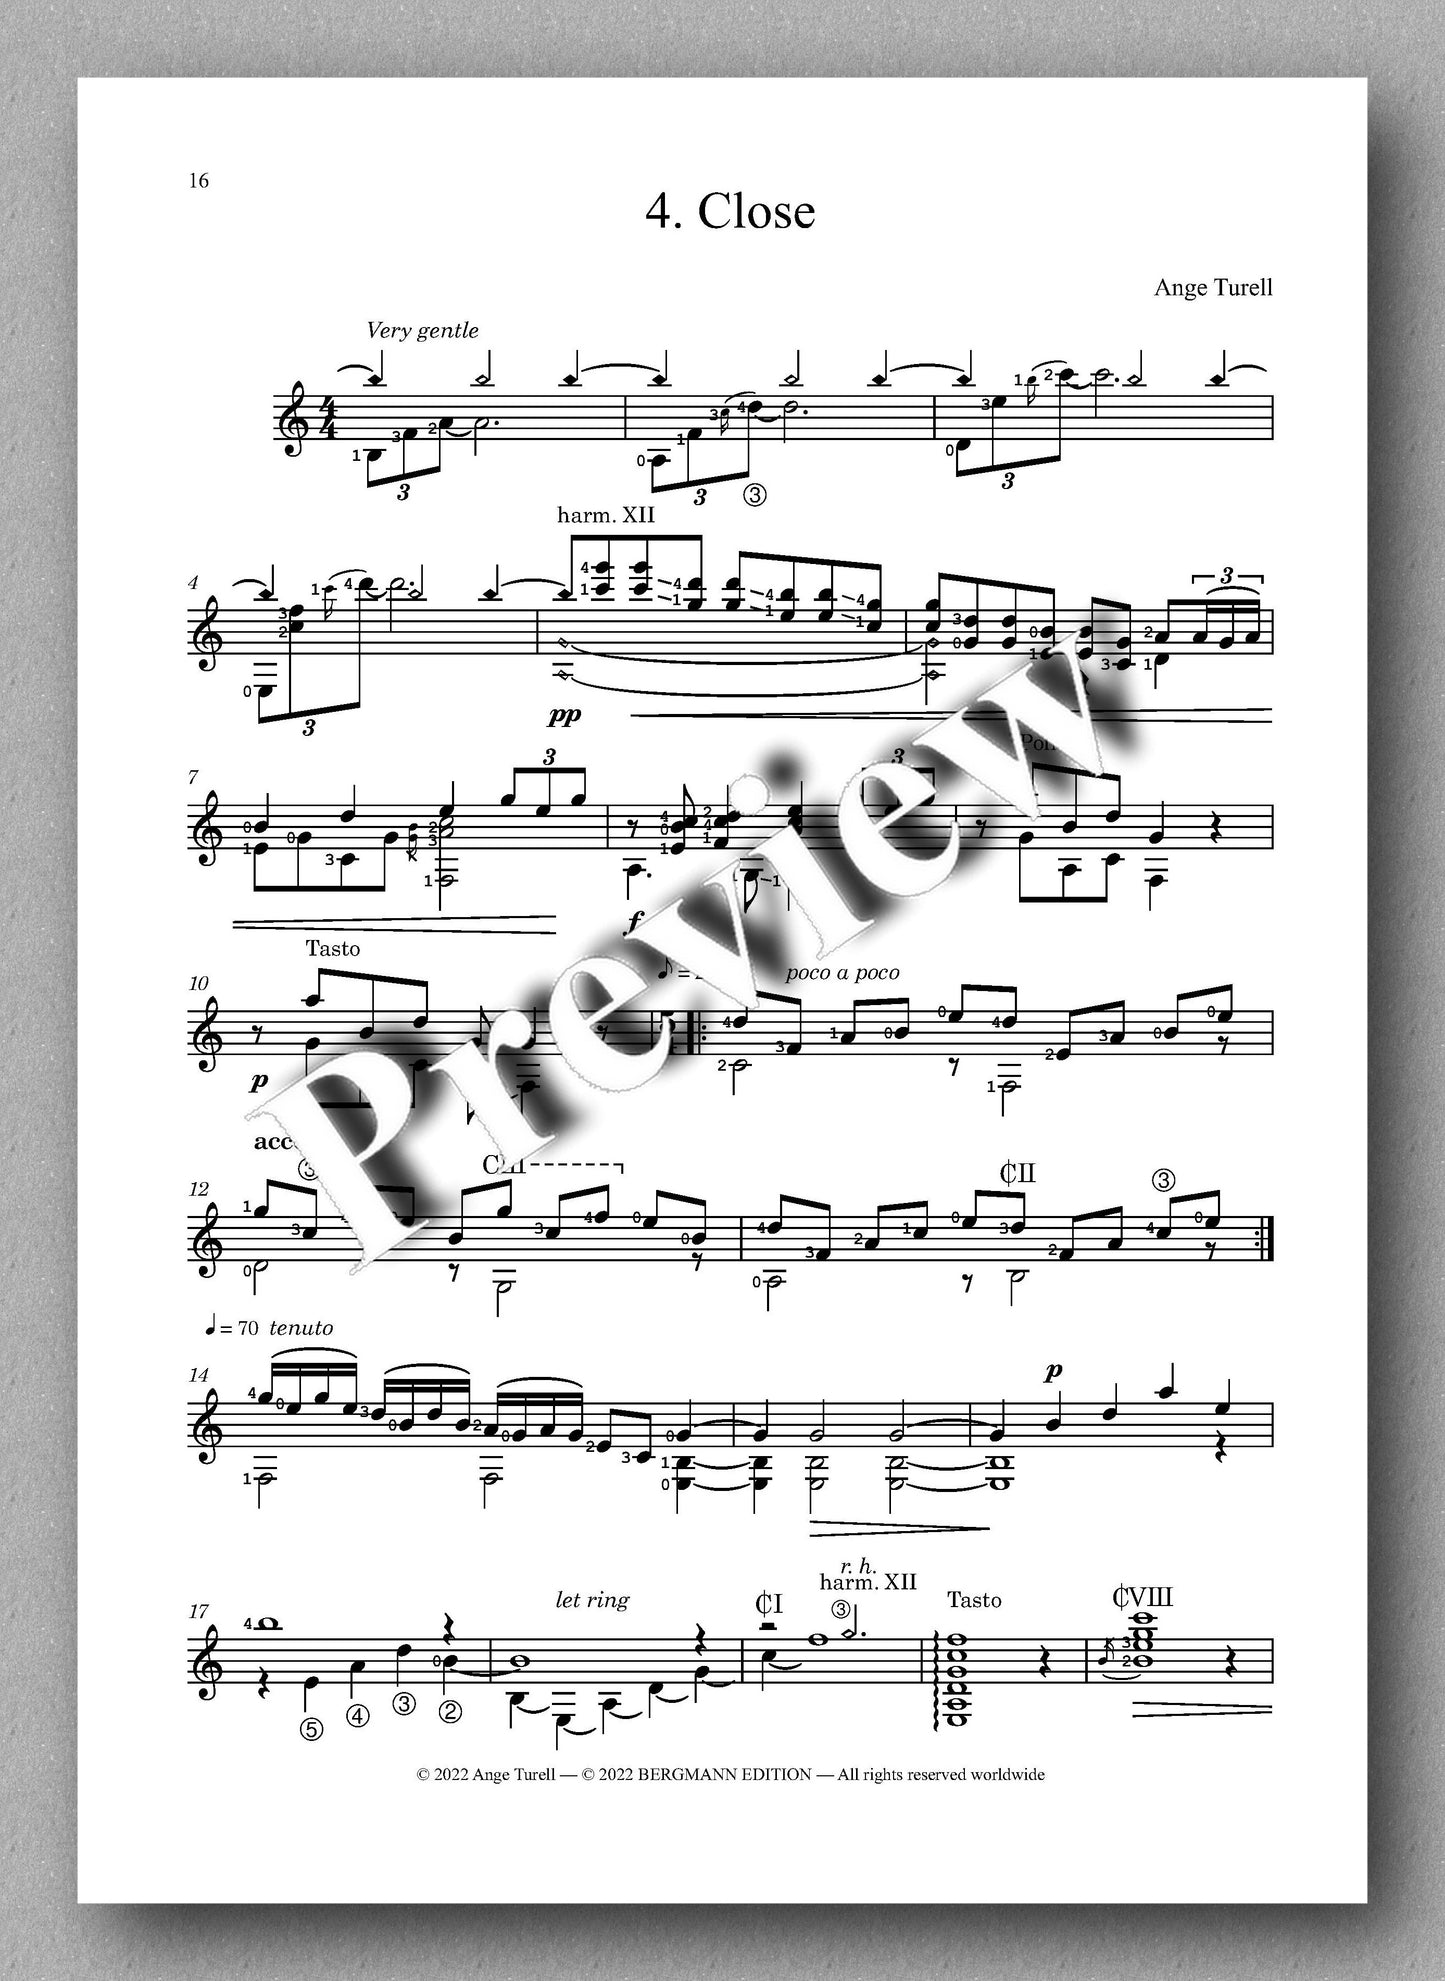 Ange Turell, Snow Poems - preview of the music score 4